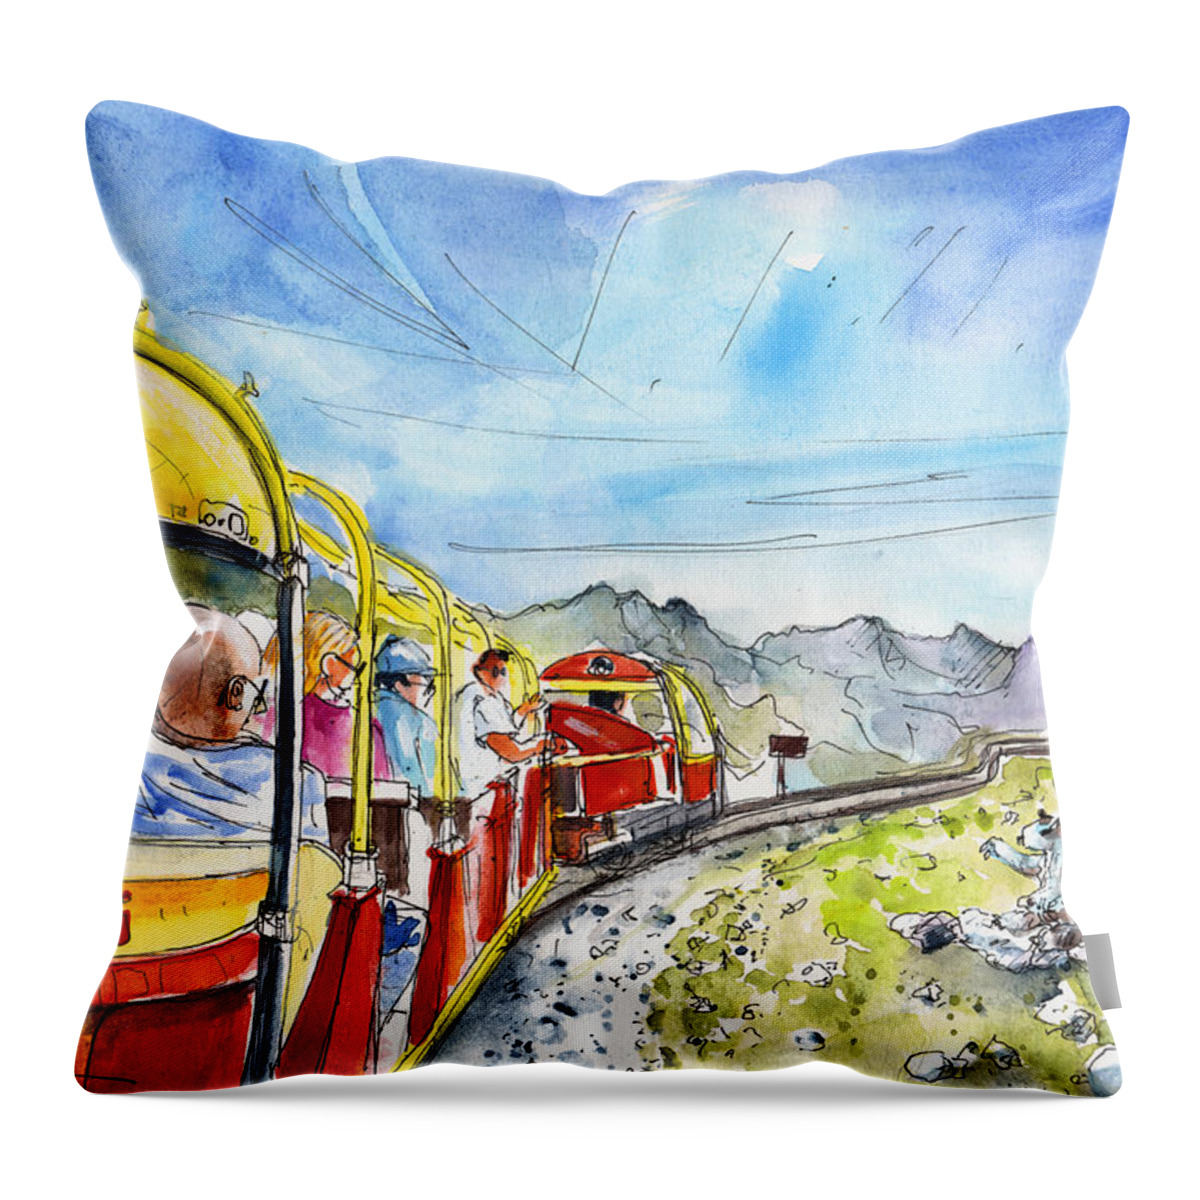 Travel Throw Pillow featuring the painting The Little Train of Artouste by Miki De Goodaboom